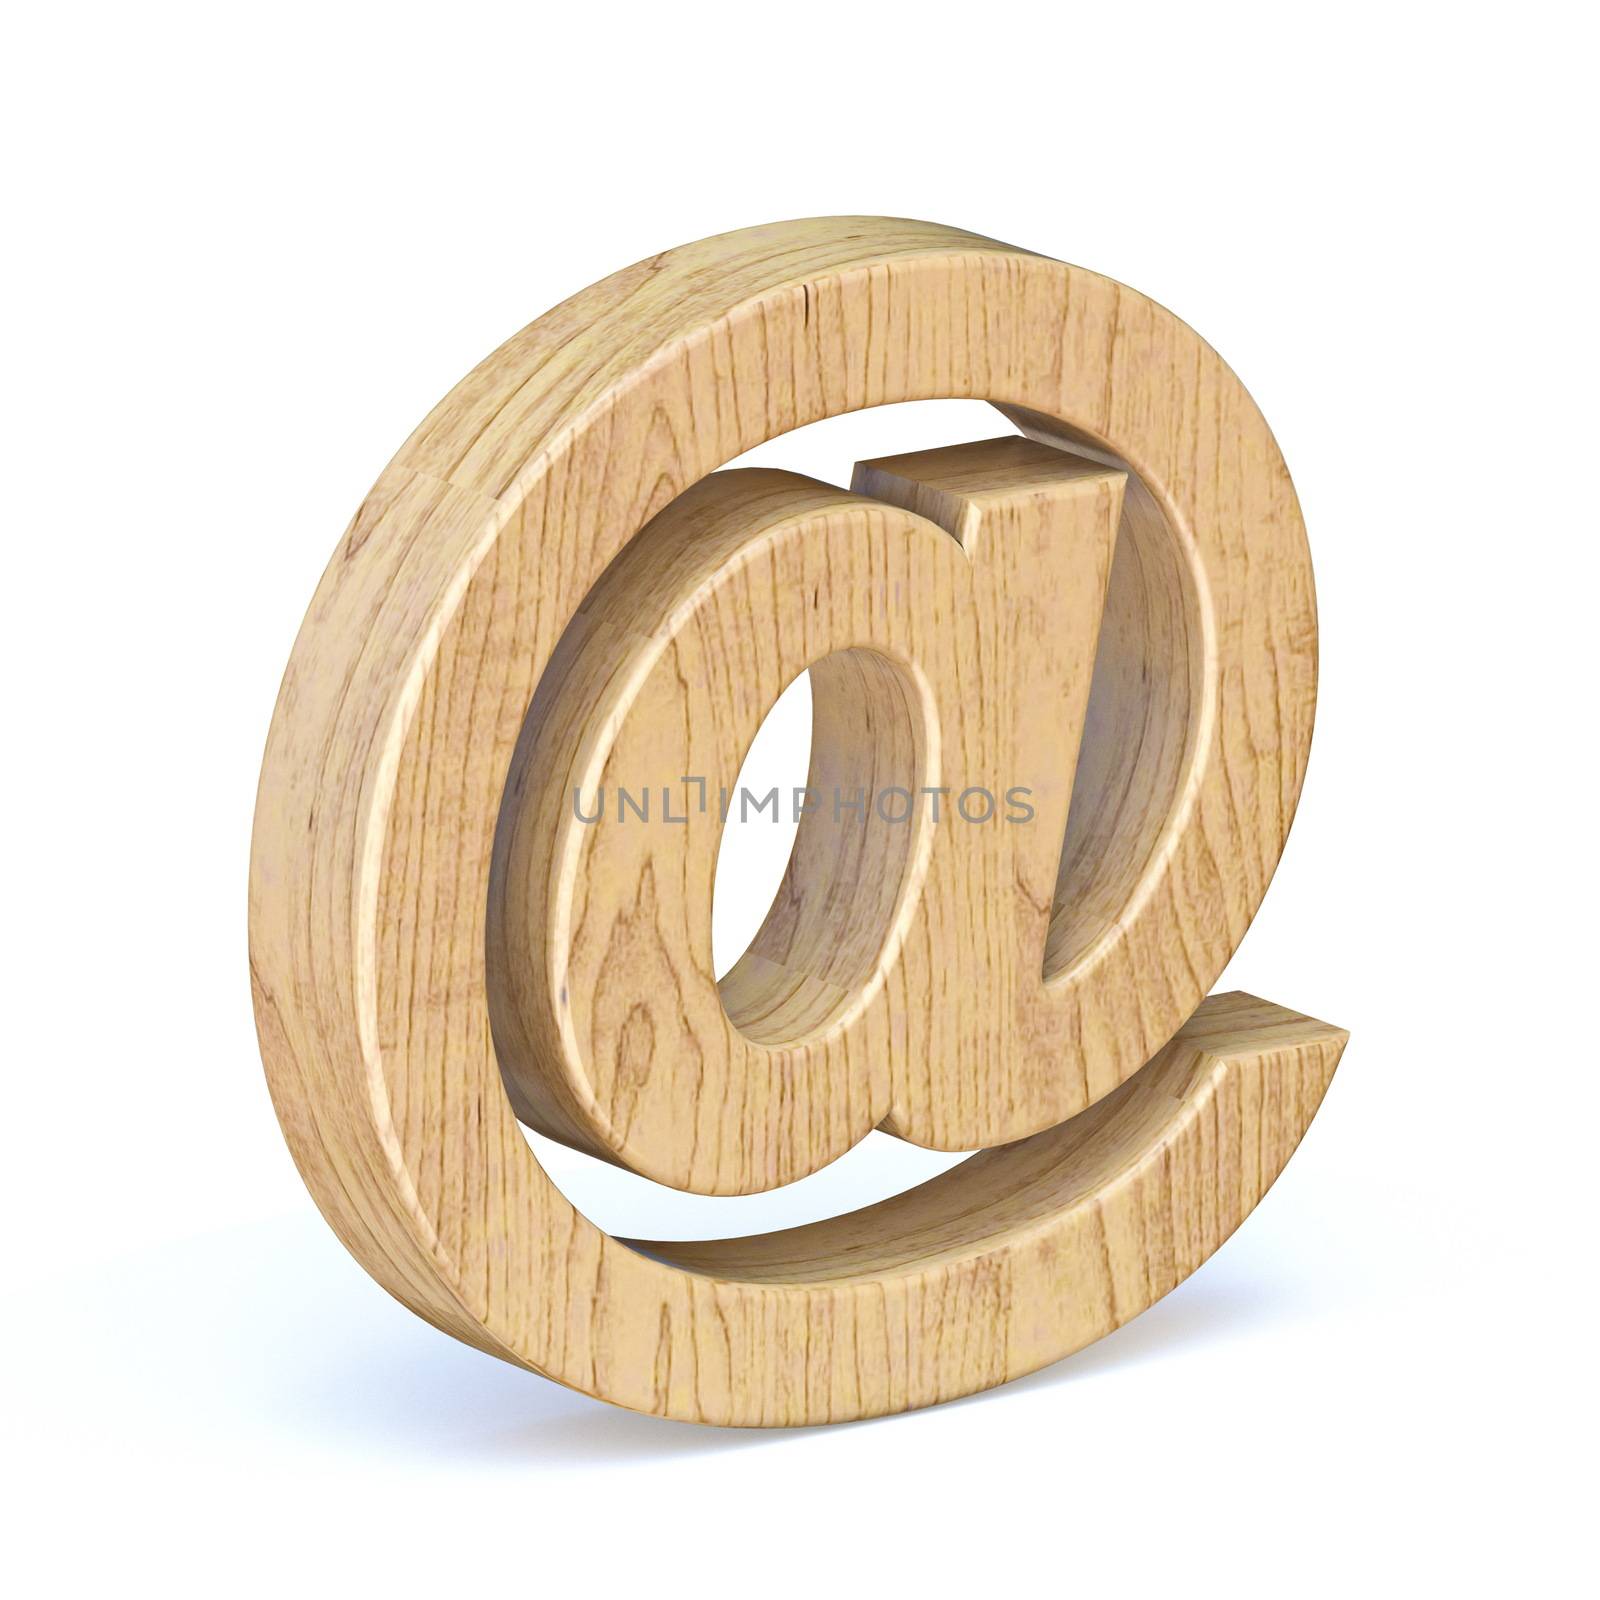 Rounded wooden font at sign 3D render illustration isolated on white background